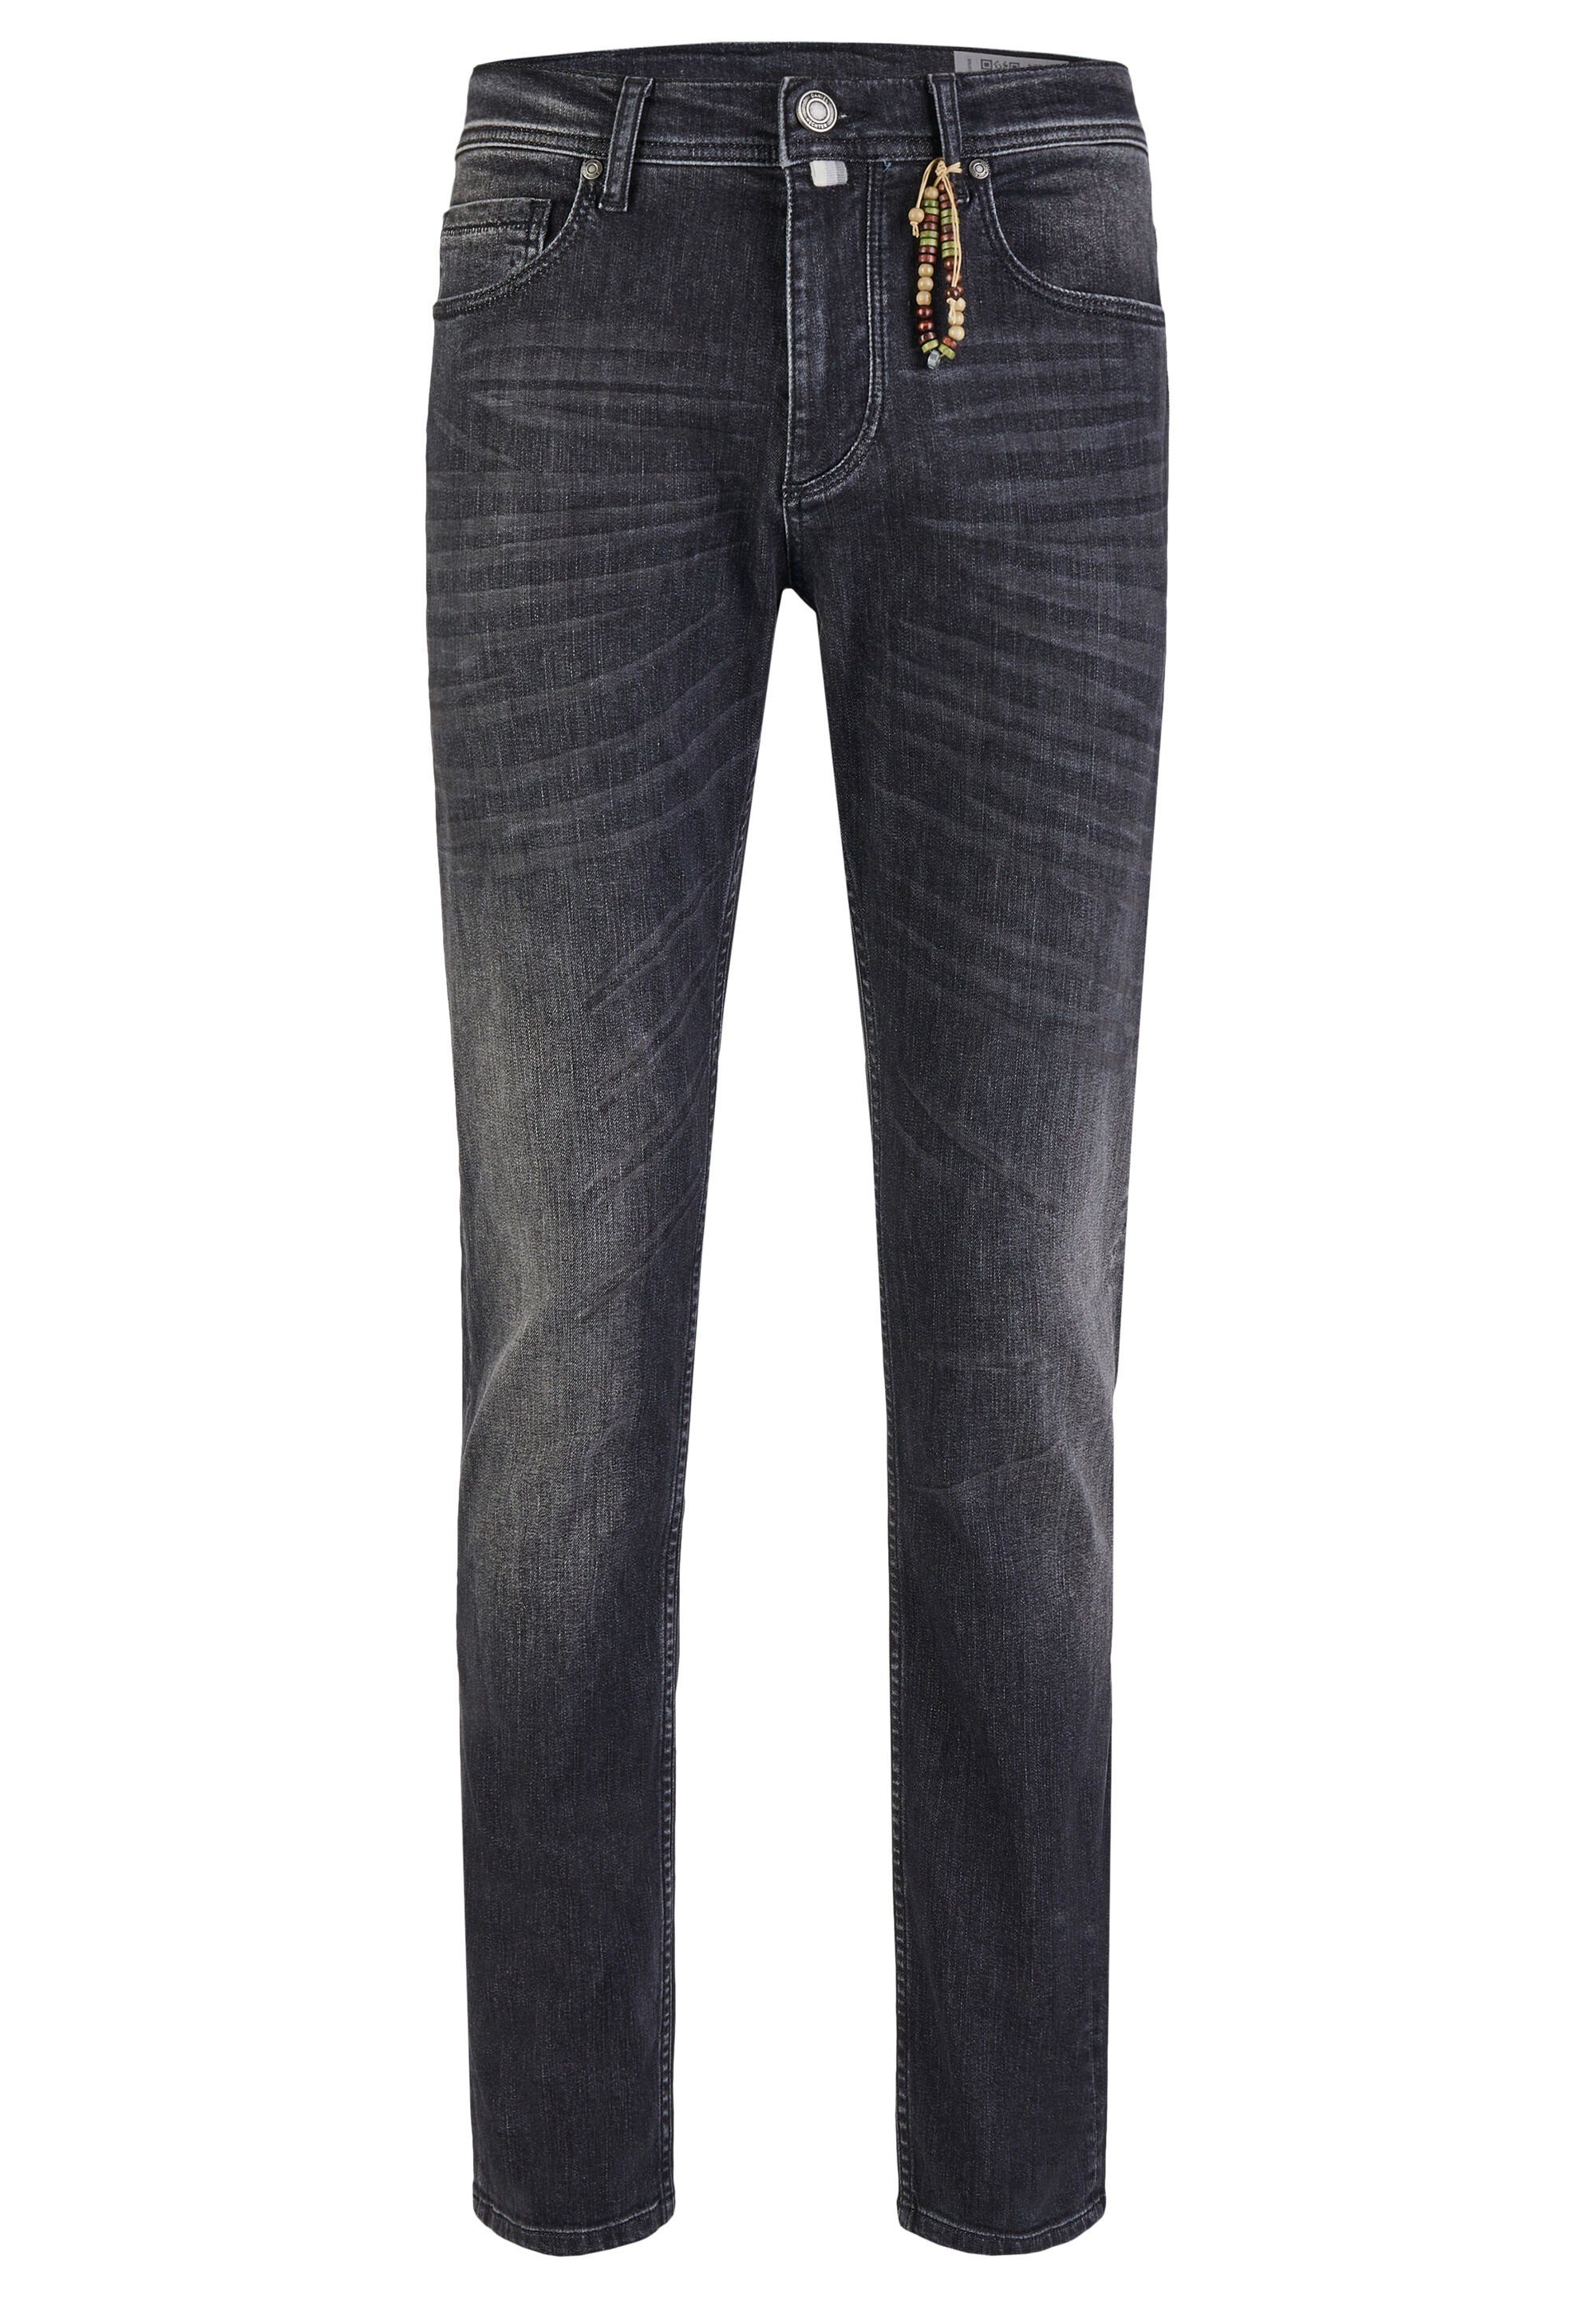 HECHTER PARIS Straight-Jeans 5-Pocket-Style